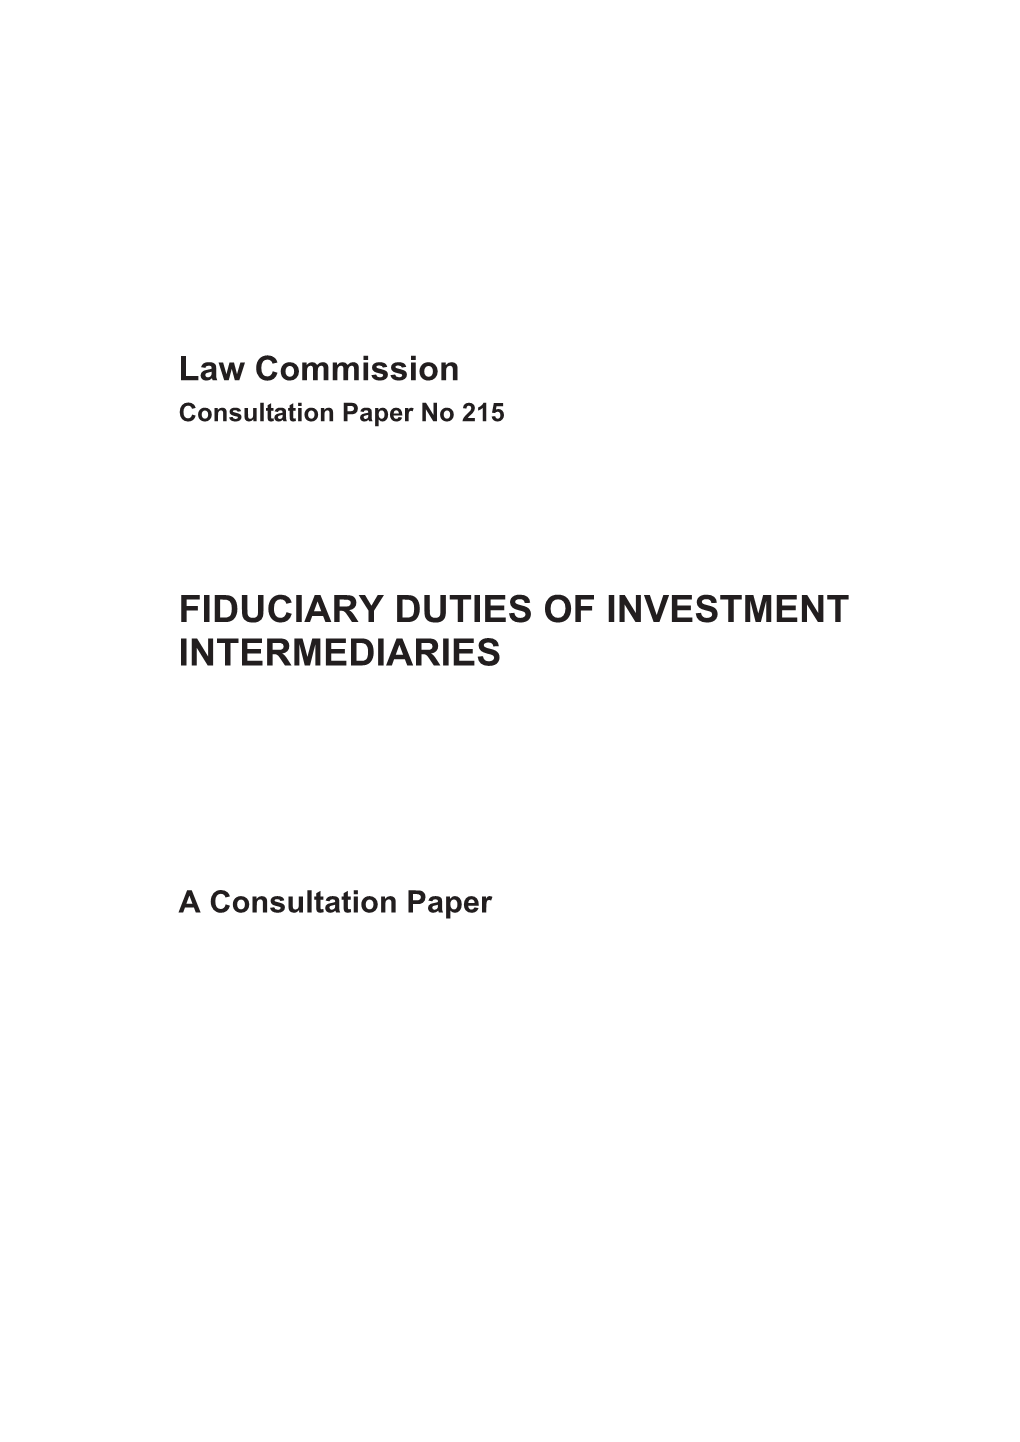 Fiduciary Duties of Investment Intermediaries: a Consultation Paper